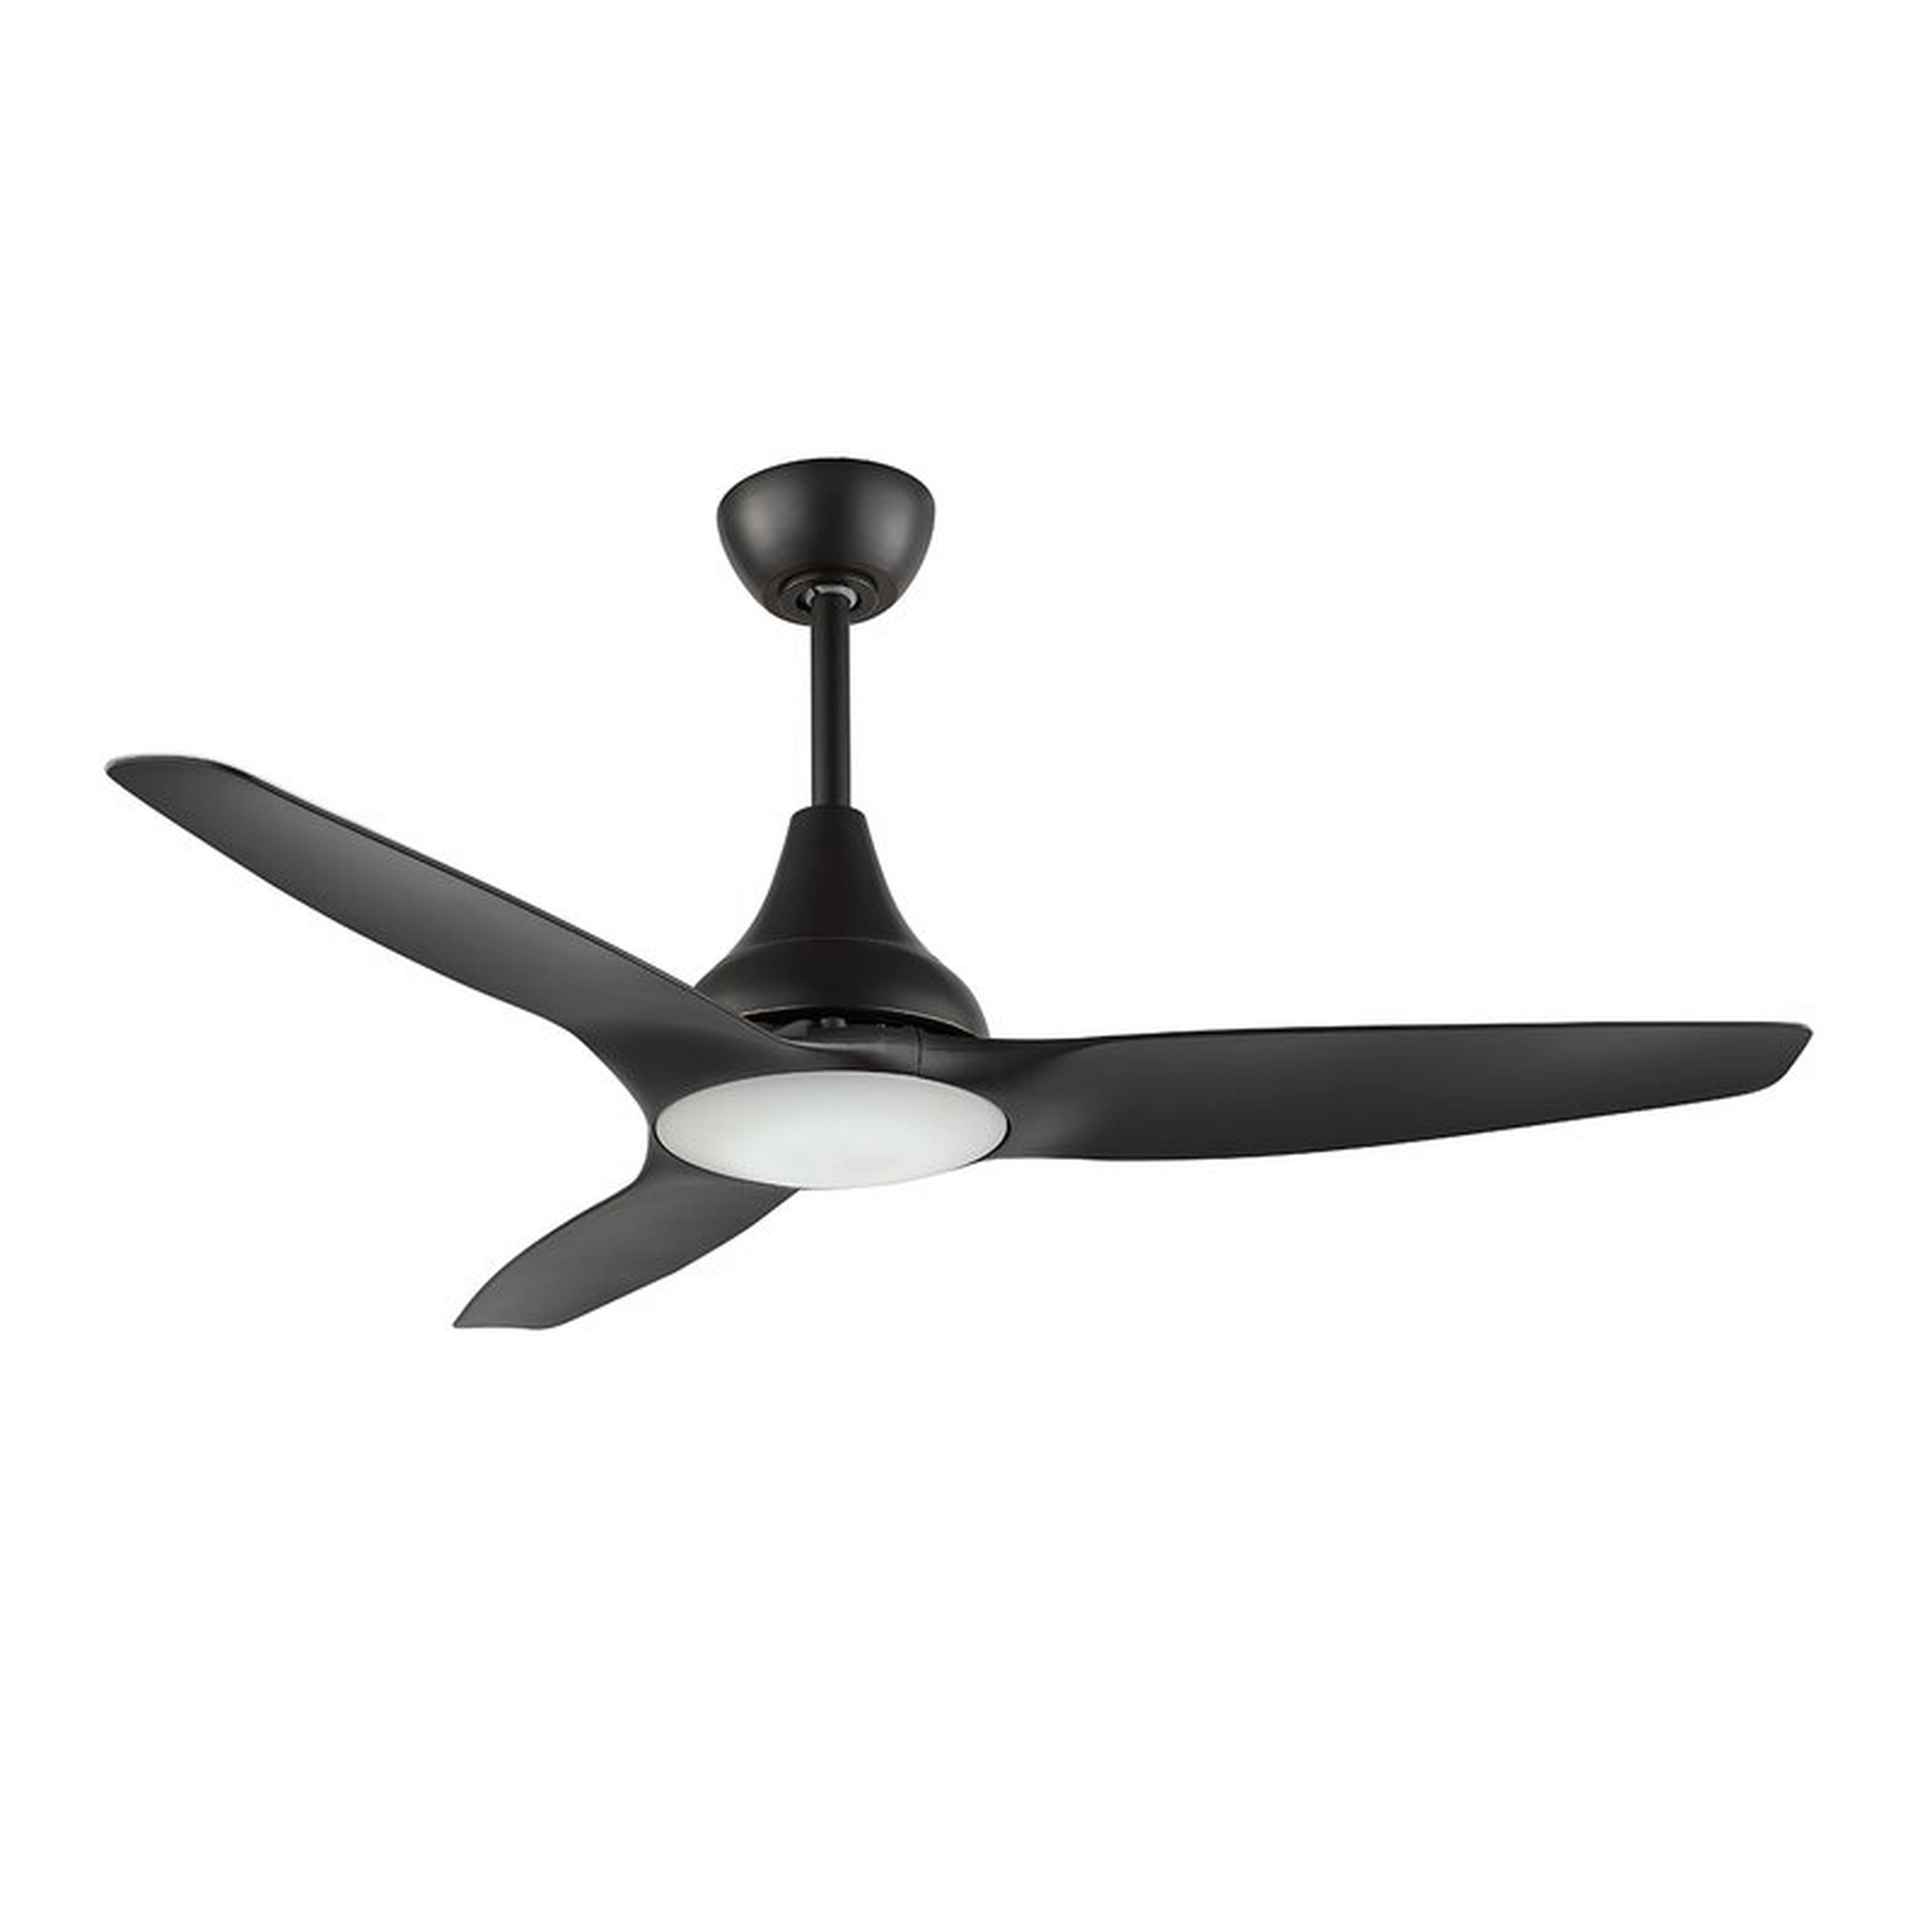 48'' Halladay 3 - Blade LED Standard Ceiling Fan with Remote Control and Light Kit Included - Wayfair